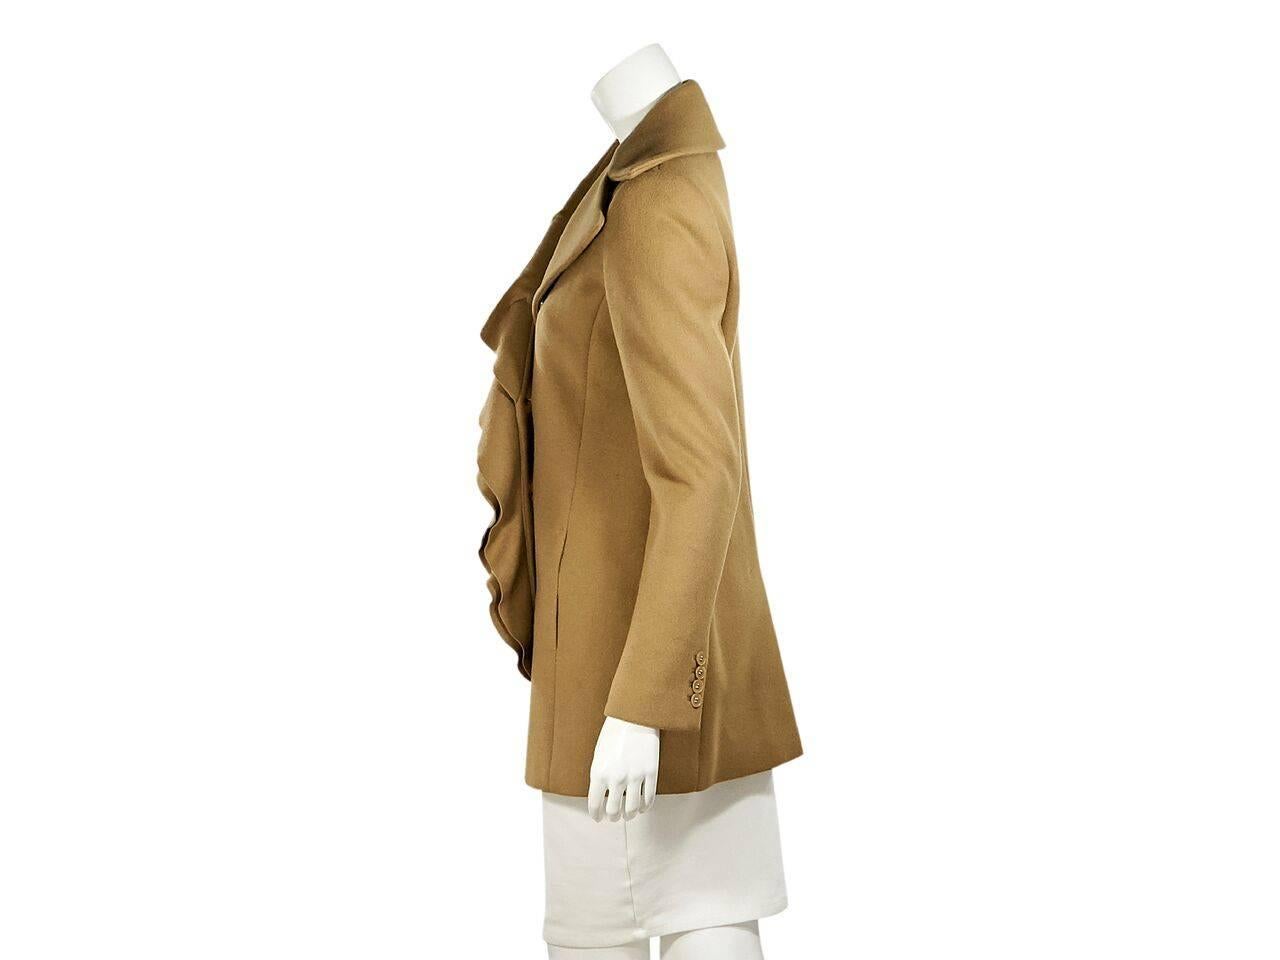 Product details:  Tan wool ruffle-trimmed coat by Elie Tahari.  Oversized notched lapel.  Long sleeves.  Four-button detail at cuffs.  Double-breasted button-front closure.  On-seam slide waist pockets.  Back center hem vent. 
Condition: Pre-owned.